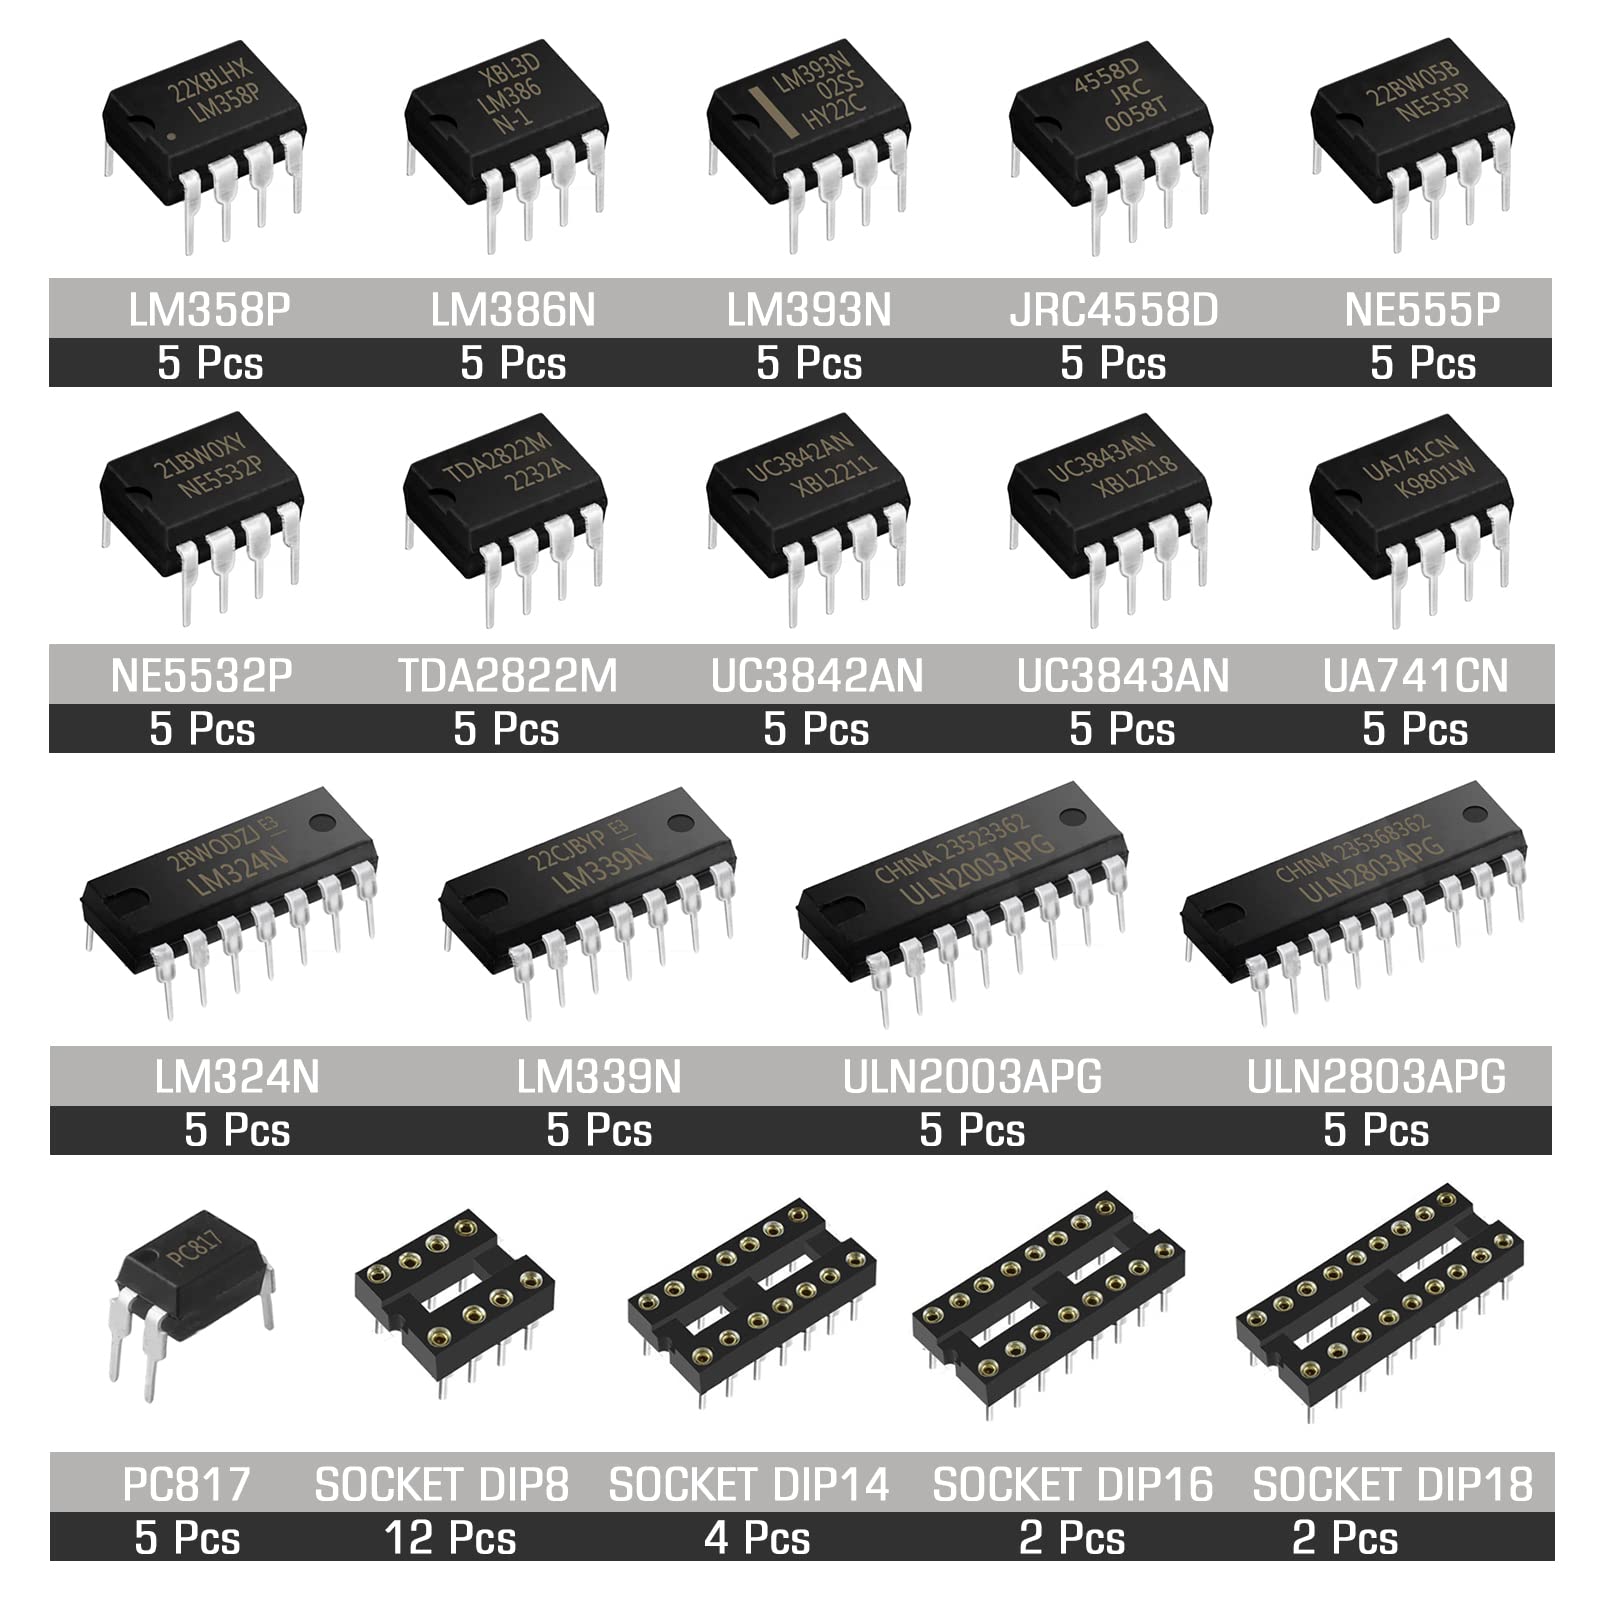 AUKENIEN 15 Values Integrated Circuit IC Assortment Kit PC817 LM358P LM386 LM393 JRC4558D NE555P NE5532P TDA2822D UC3842AN UC3843AN UA741CN LM324N LM339N ULN2003APG ULN2803APG Op Amp Amplifier Timer